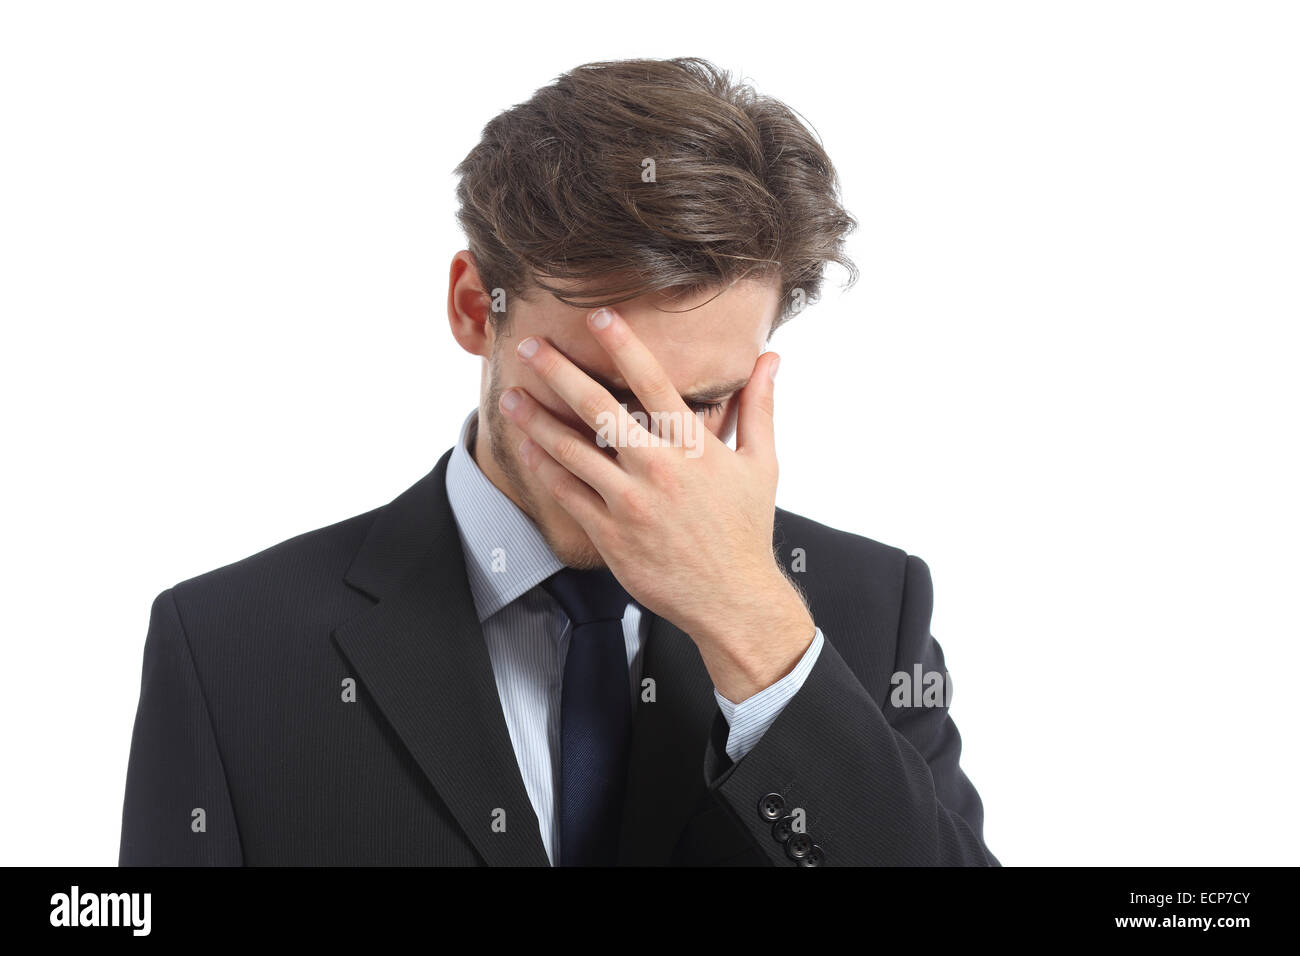 Worried or ashamed man covering his face with hand isolated on a white background Stock Photo